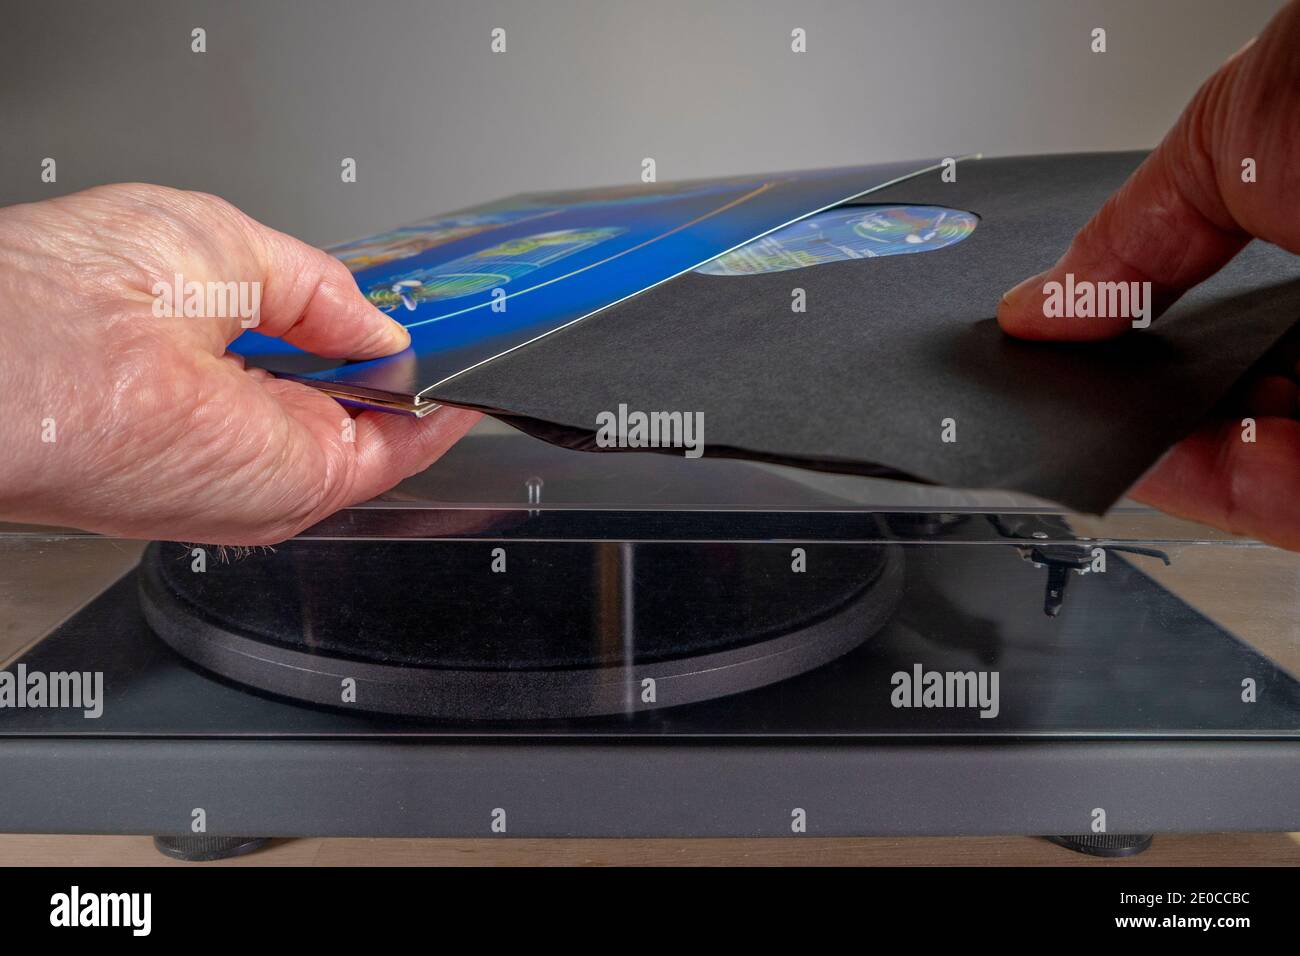 Closeup POV shot of a man’s hands sliding out a paper sleeve, holding a vinyl LP album, from the cardboard cover, above a turntable / record player. Stock Photo